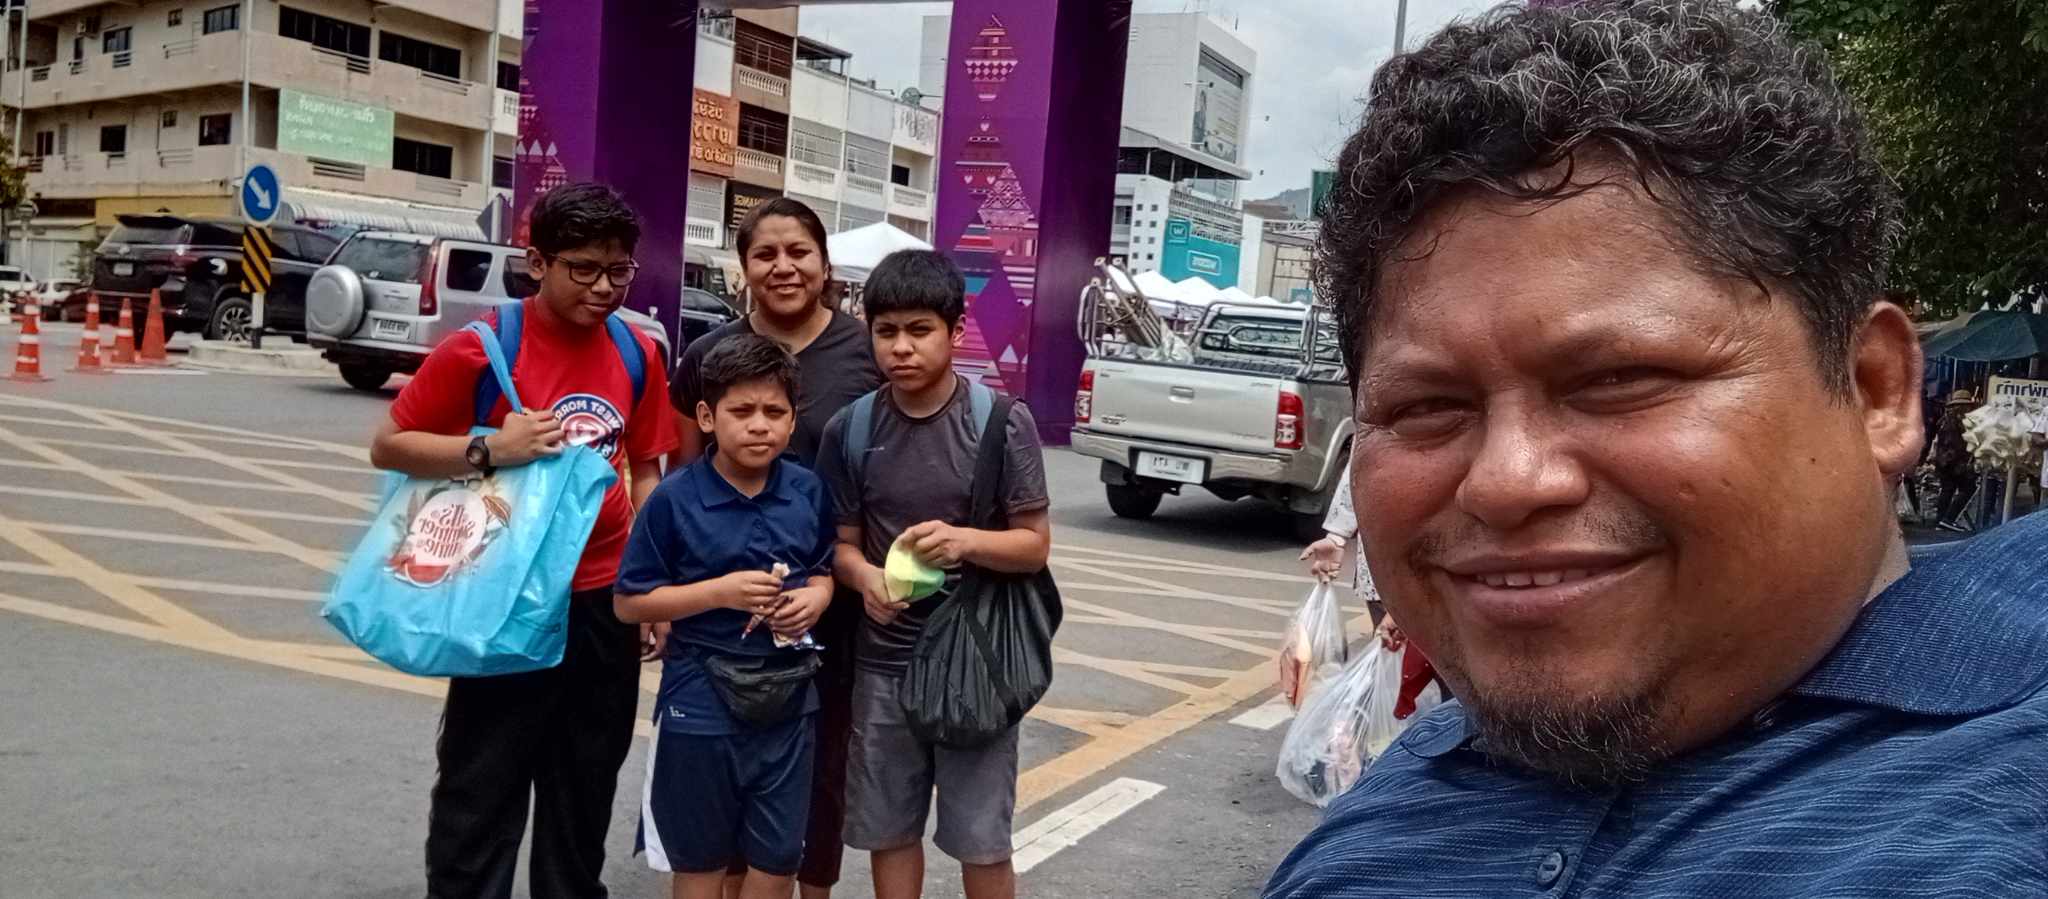 The Mendez family (Mexico), serving in Thailand, need your prayers.